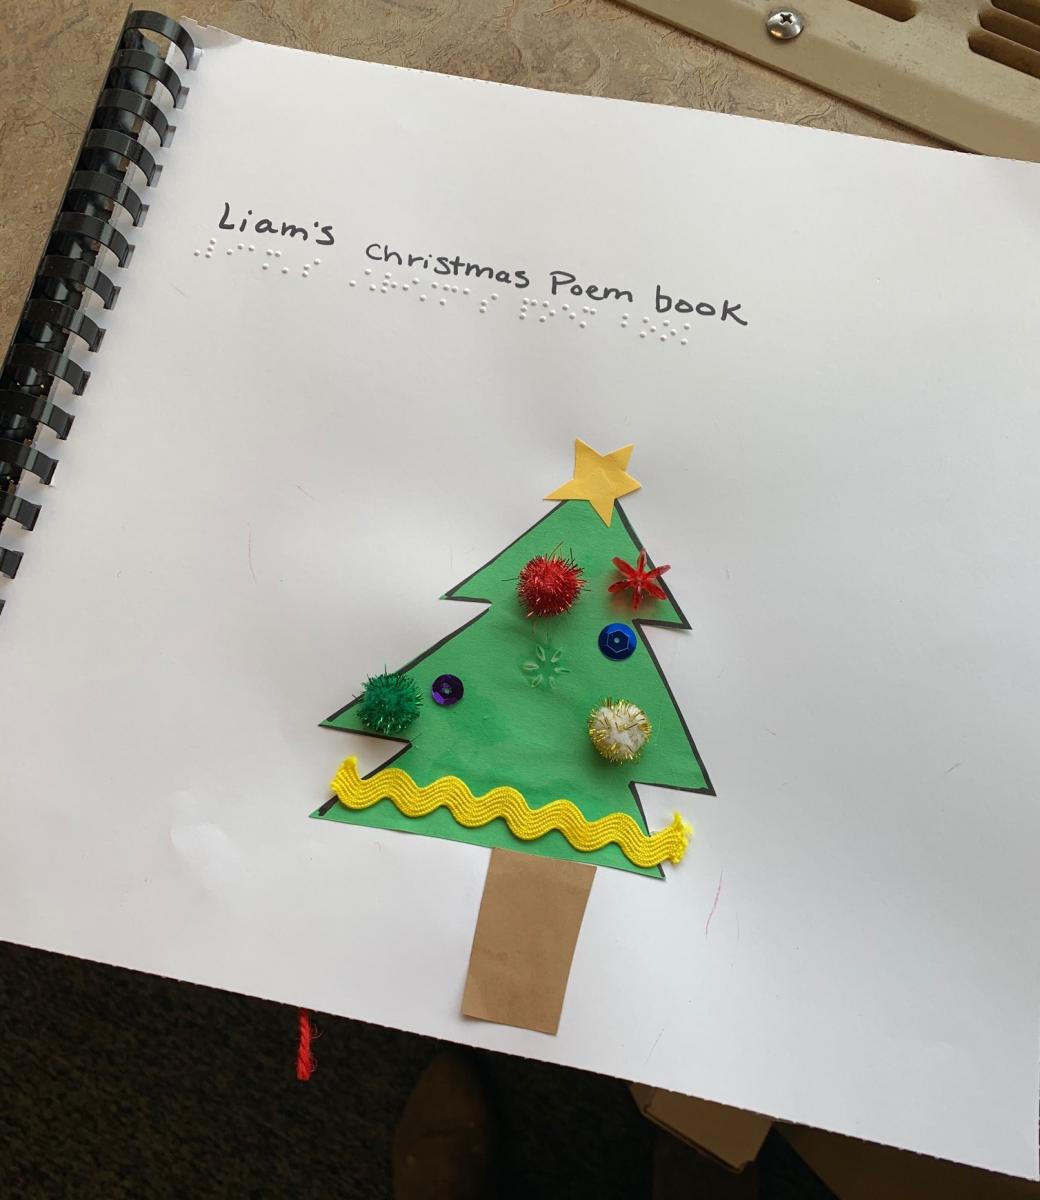 Cover of Christmas Poem book with tactile Christmas tree